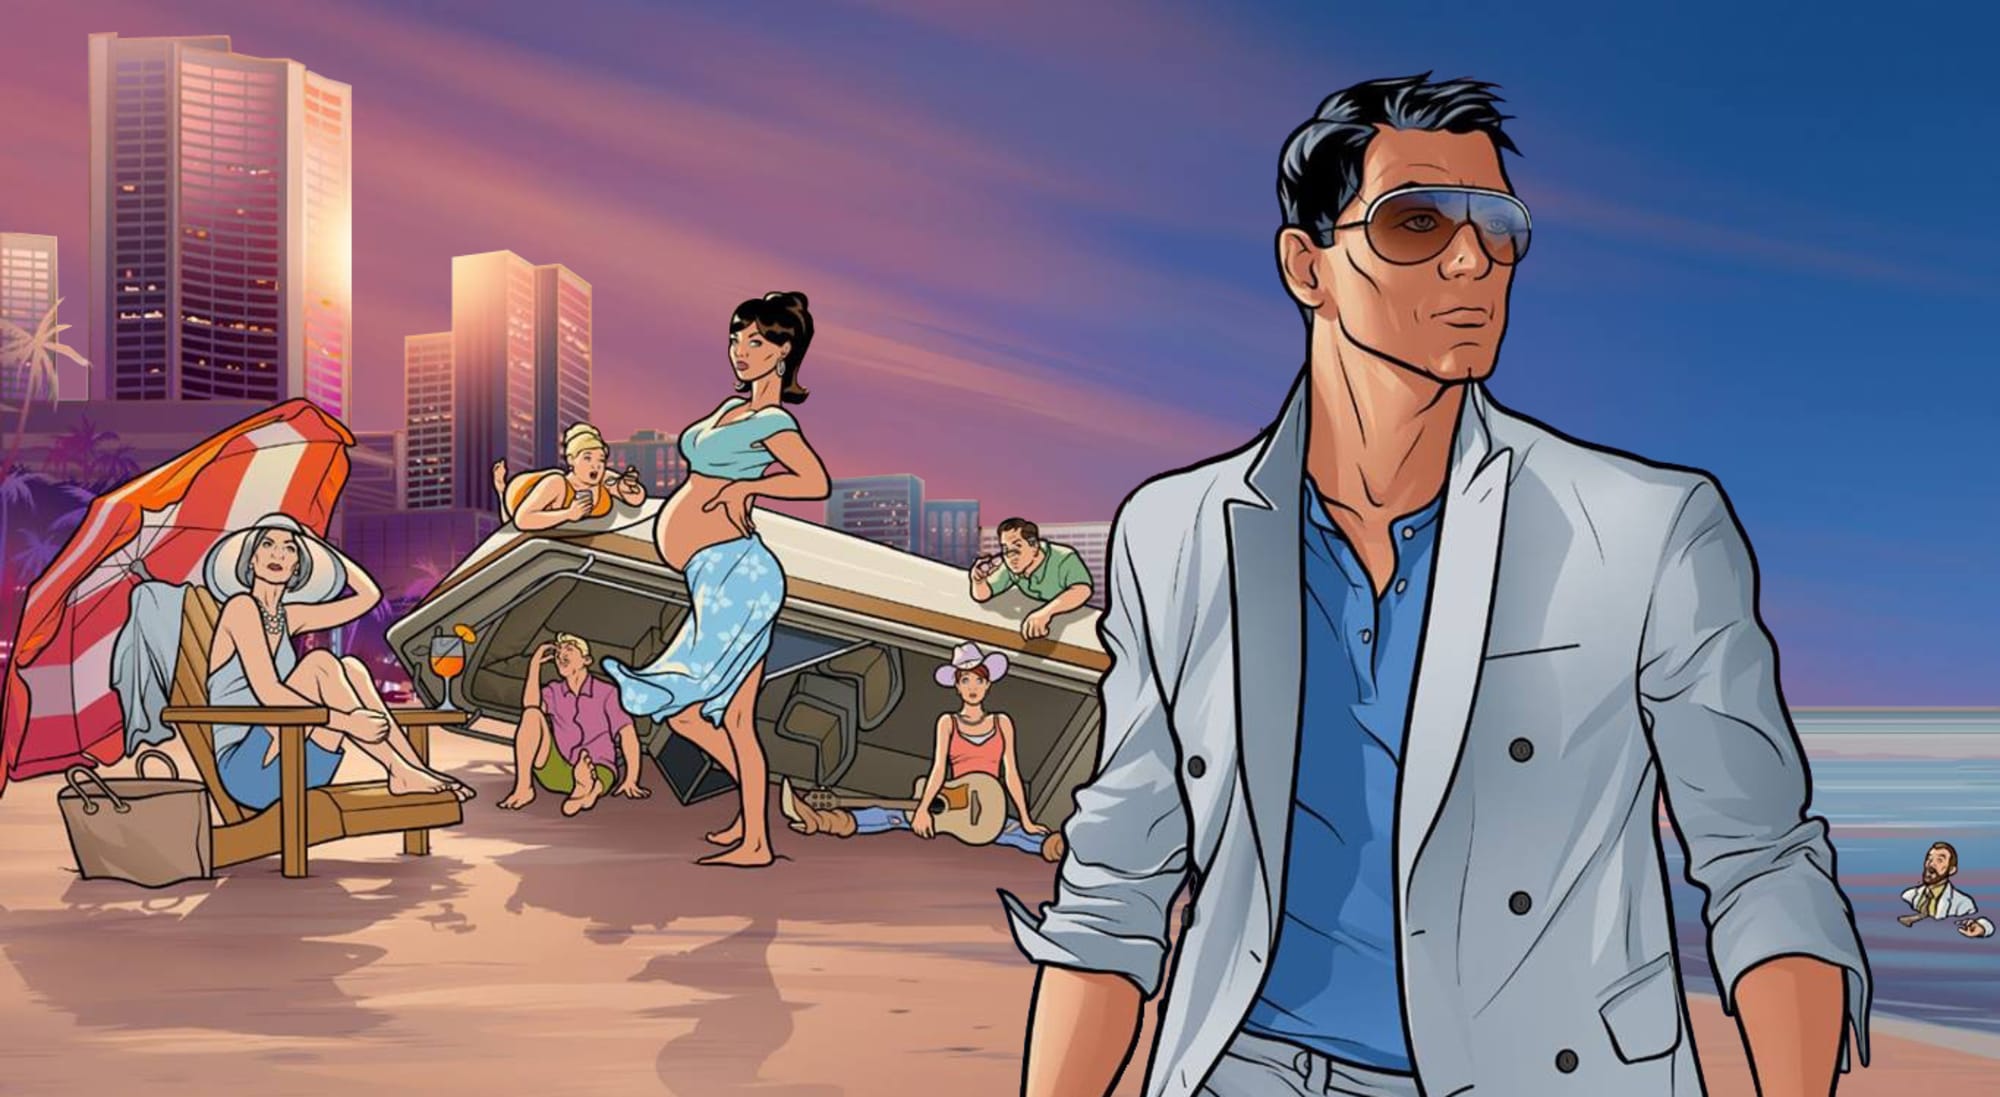 50 Best Comedy TV Shows on Netflix: Archer is must-see TV